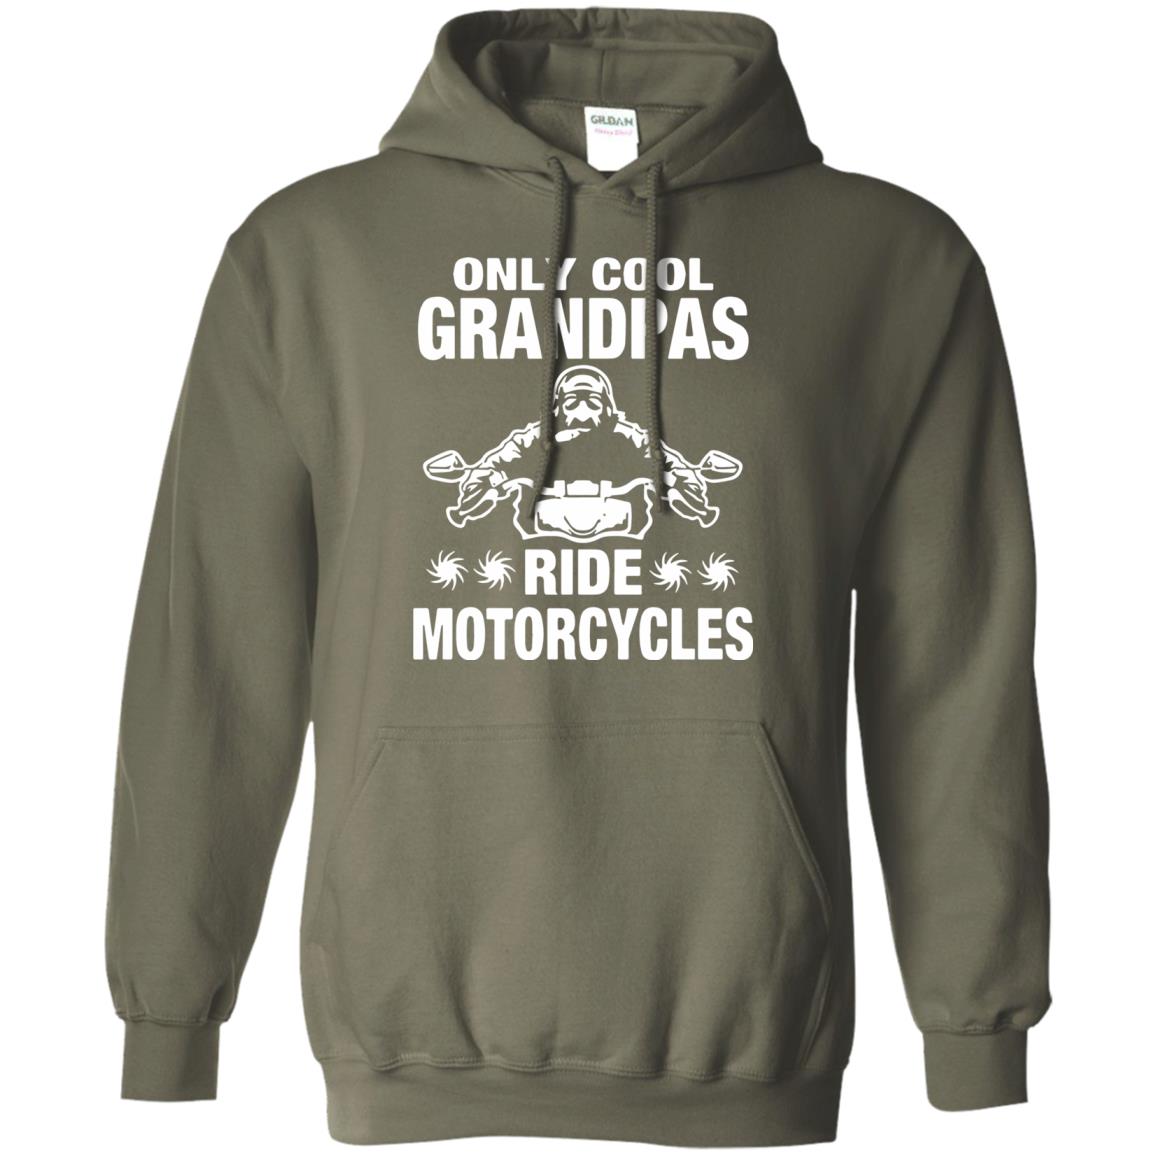 Only Cool Grandpas Ride Motorcycles hoodie - military green